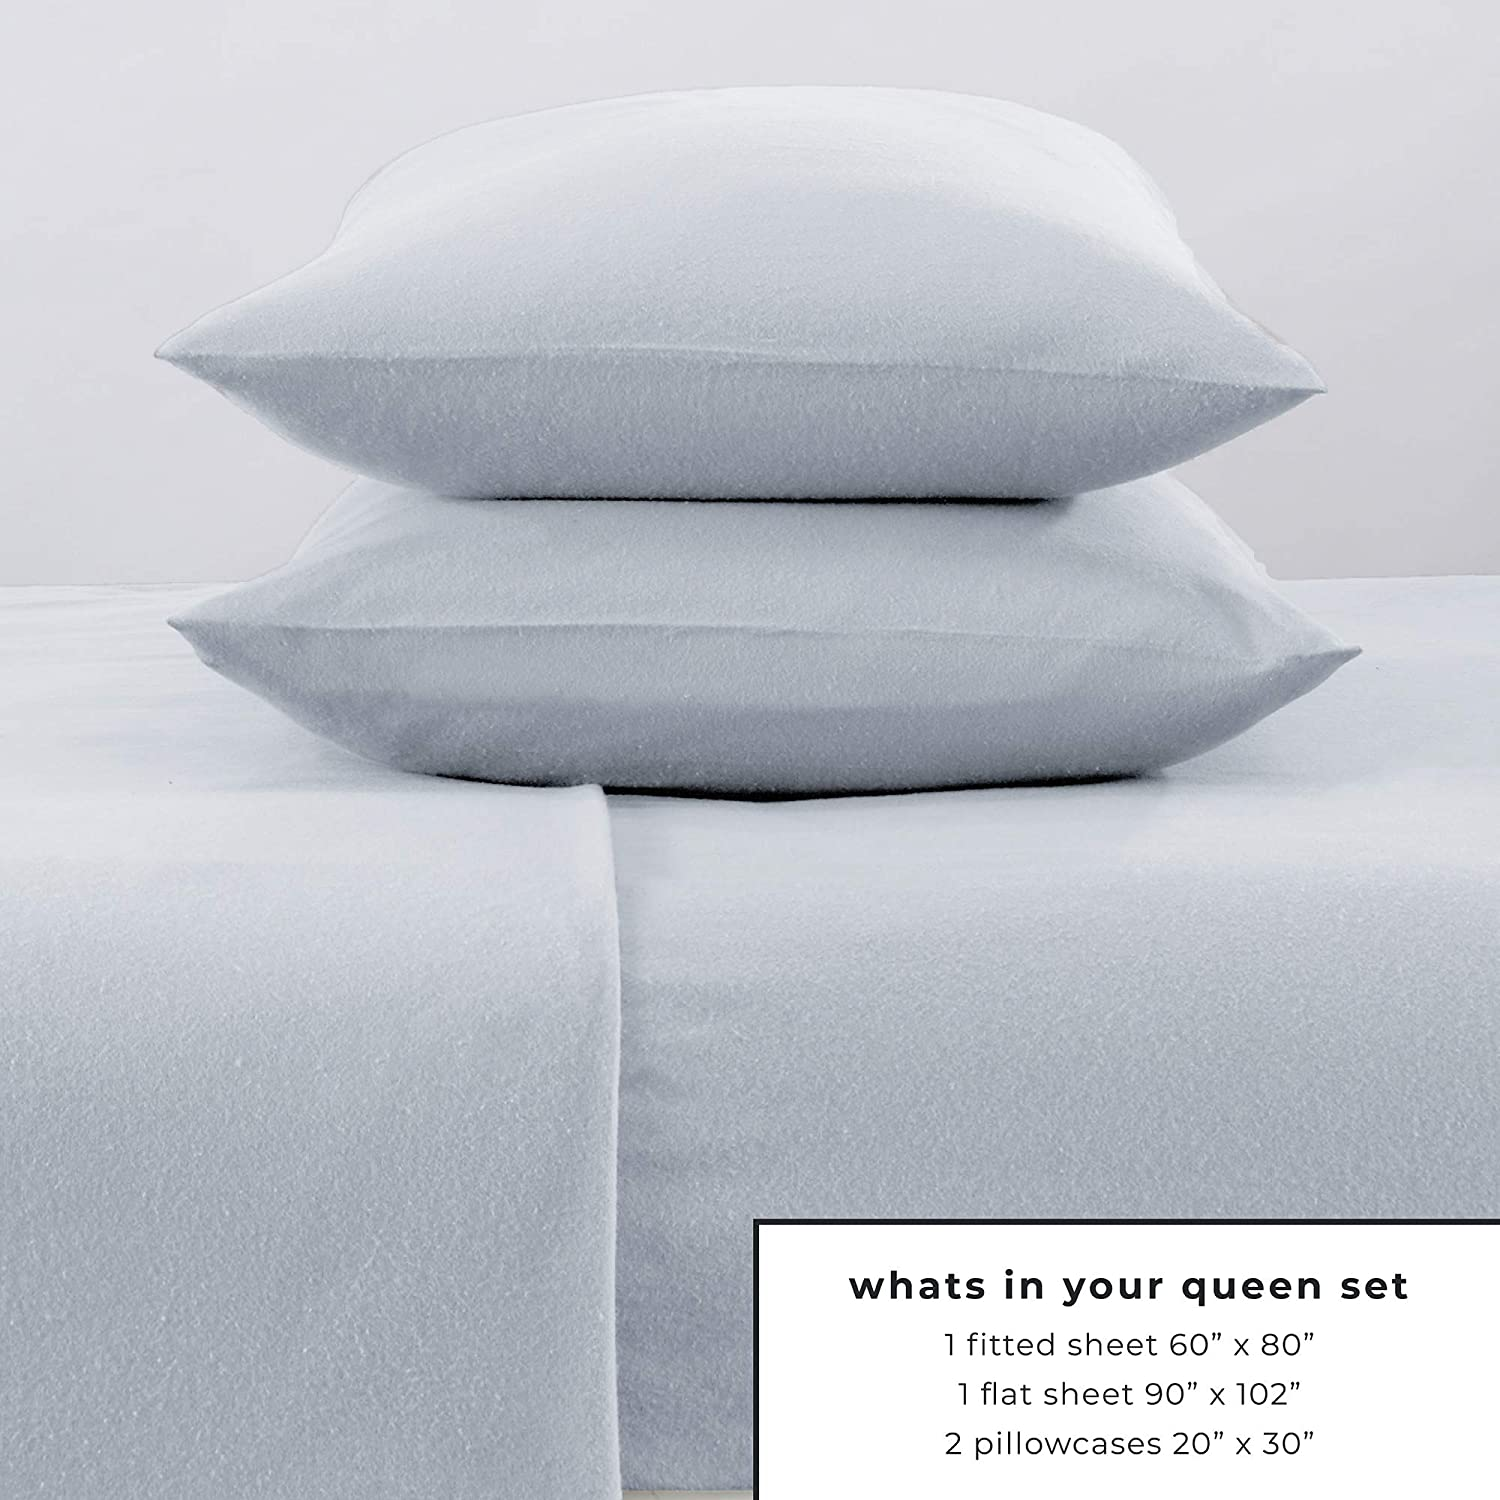 Luxury Home Extra Soft 100% Turkish Cotton Flannel Sheet Set - Deep Pocket Bed Sheets